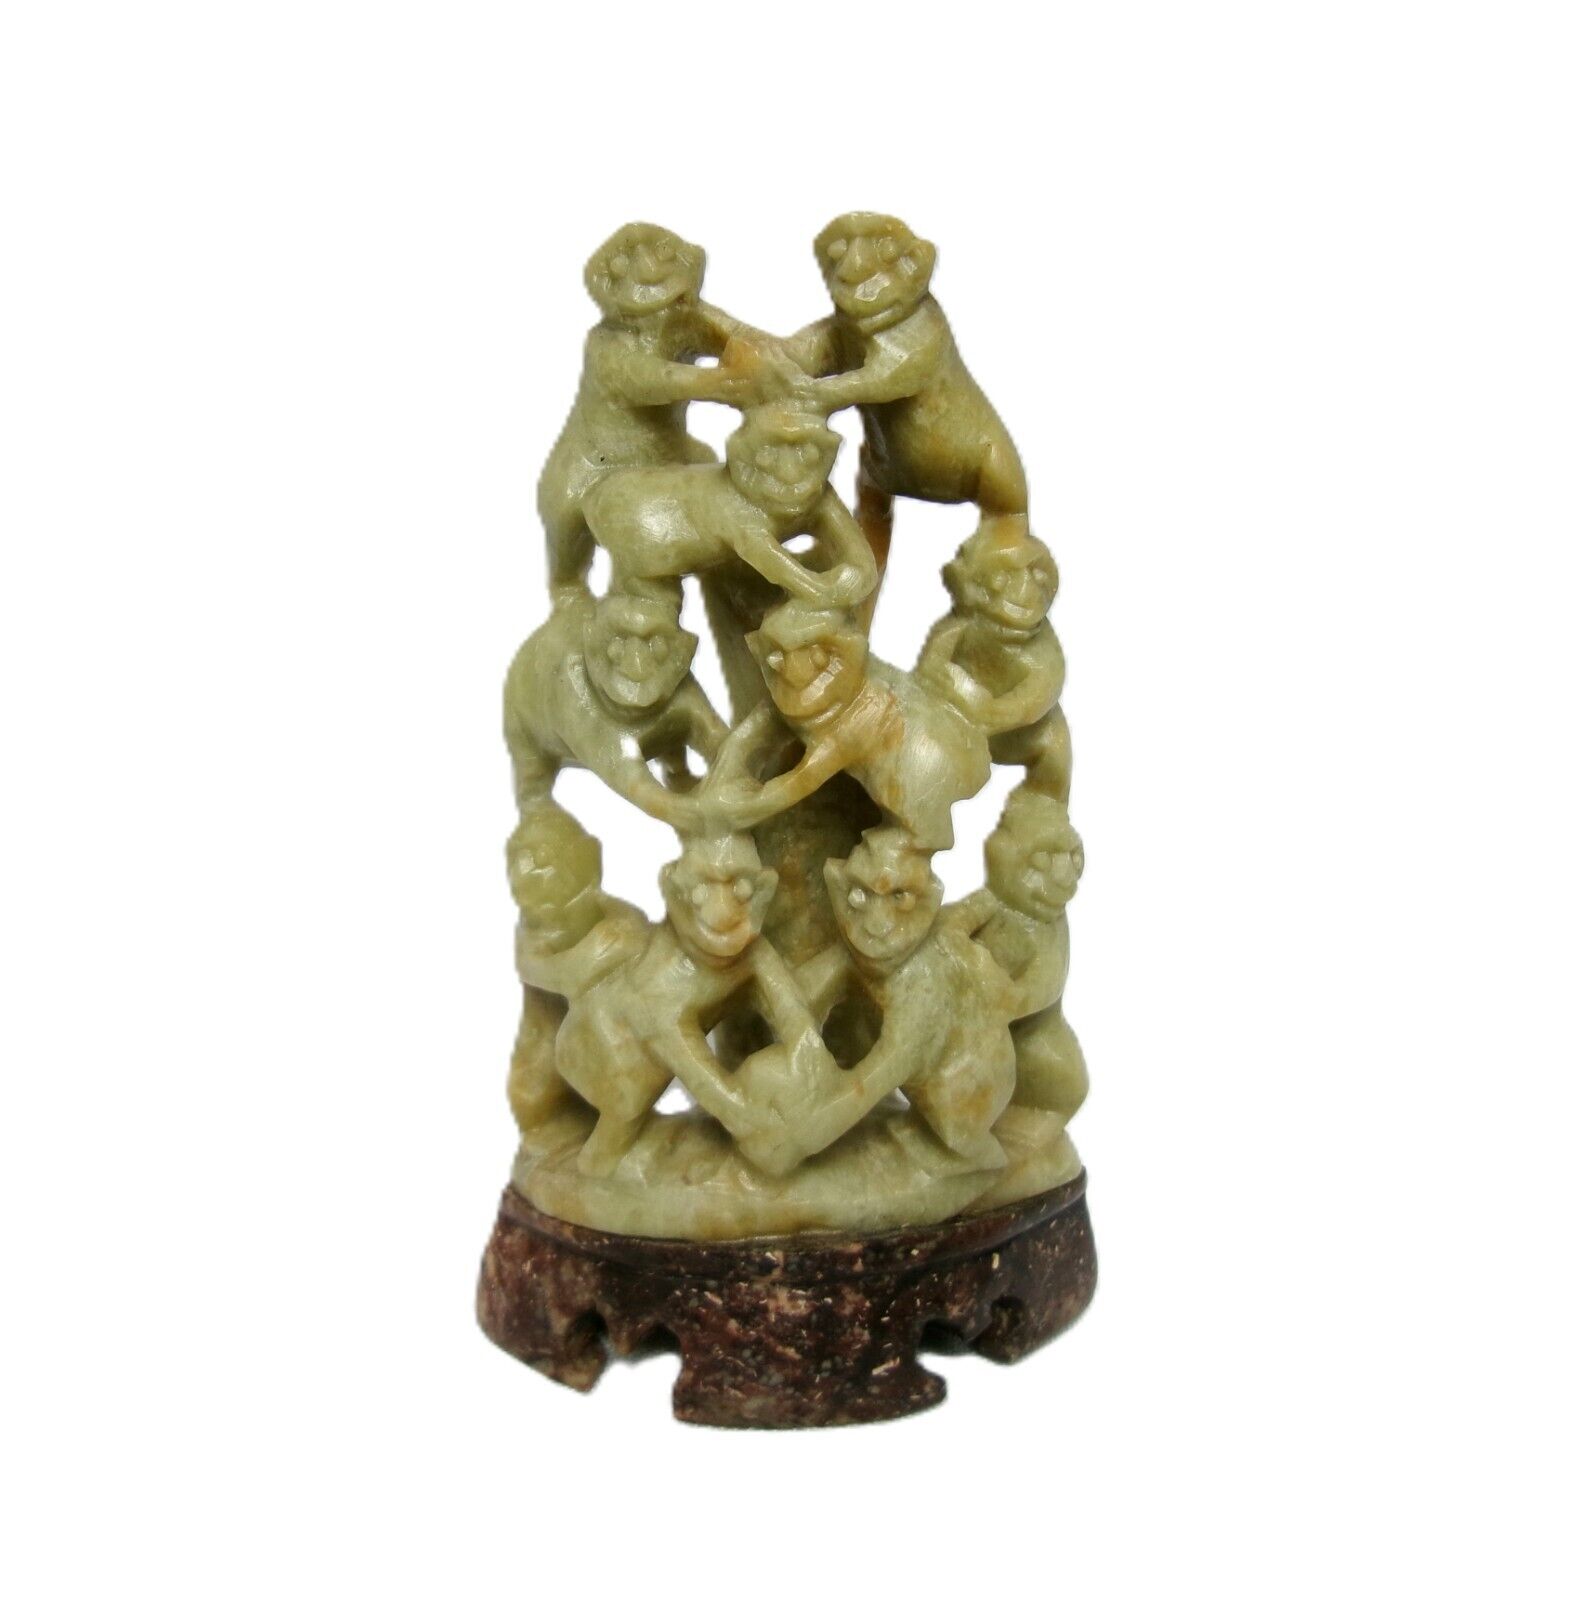 Beautiful Vintage Asian Hand Carved Soapstone Pile of Adorable Monkeys Figurine